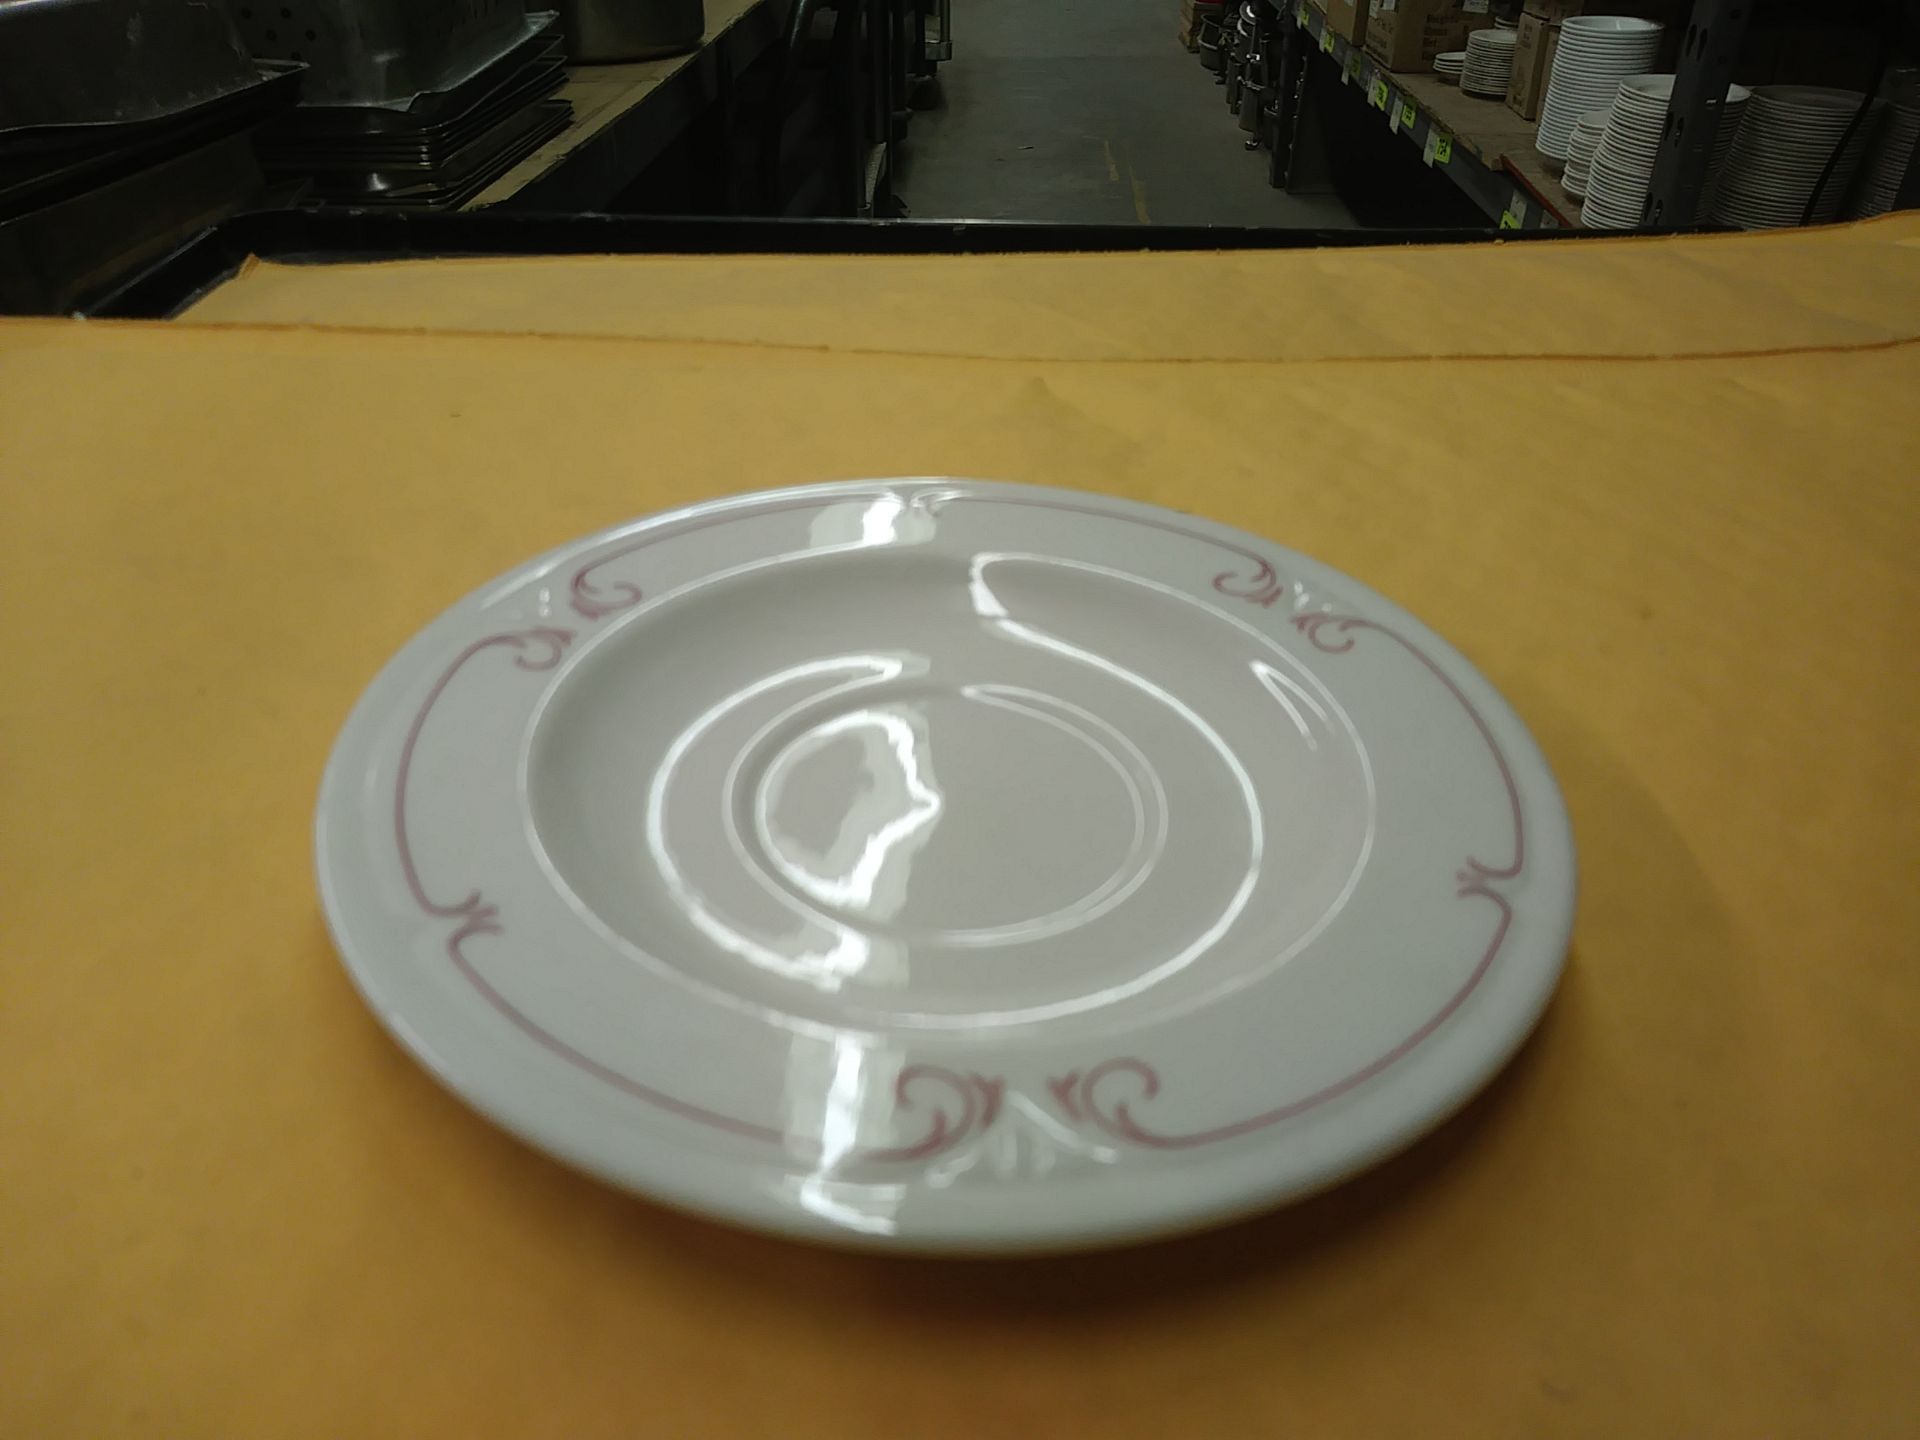 5.75" SYRACUSE SAUCER (35D) (includes QTY 341 in this lot)